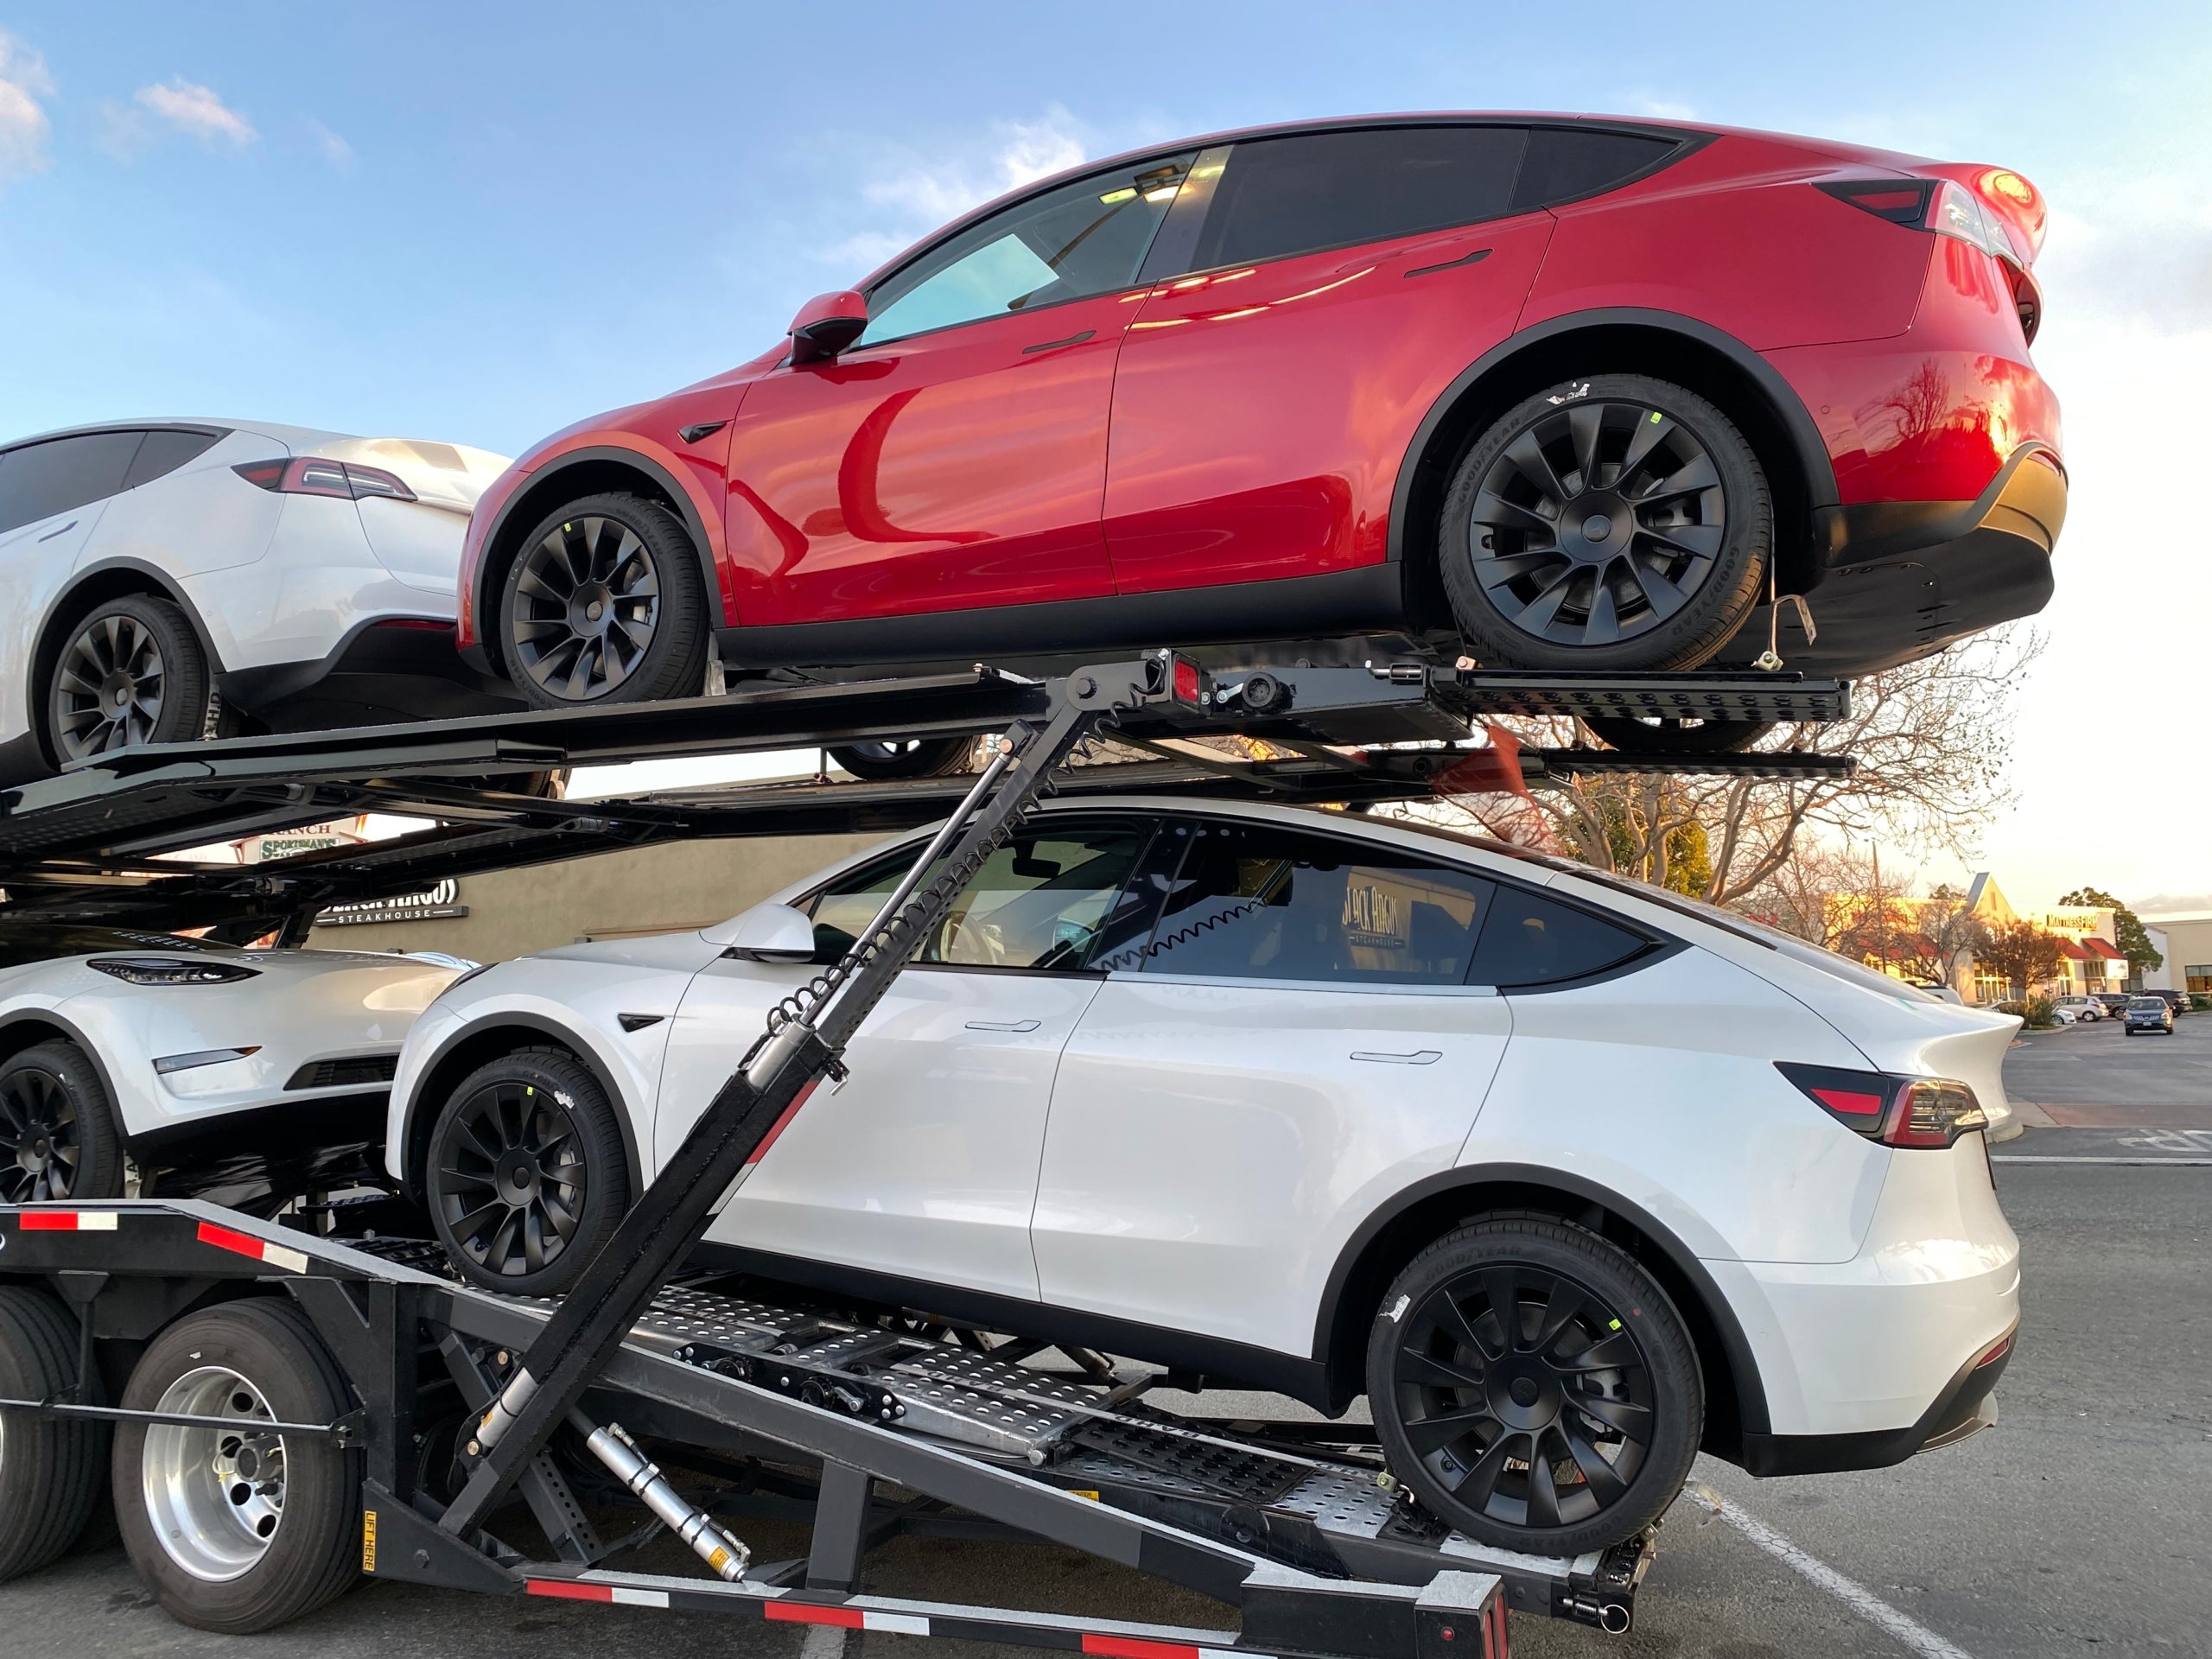 Tesla Continues With The Exponential Growth of Total Deliveries Up 40% YoY